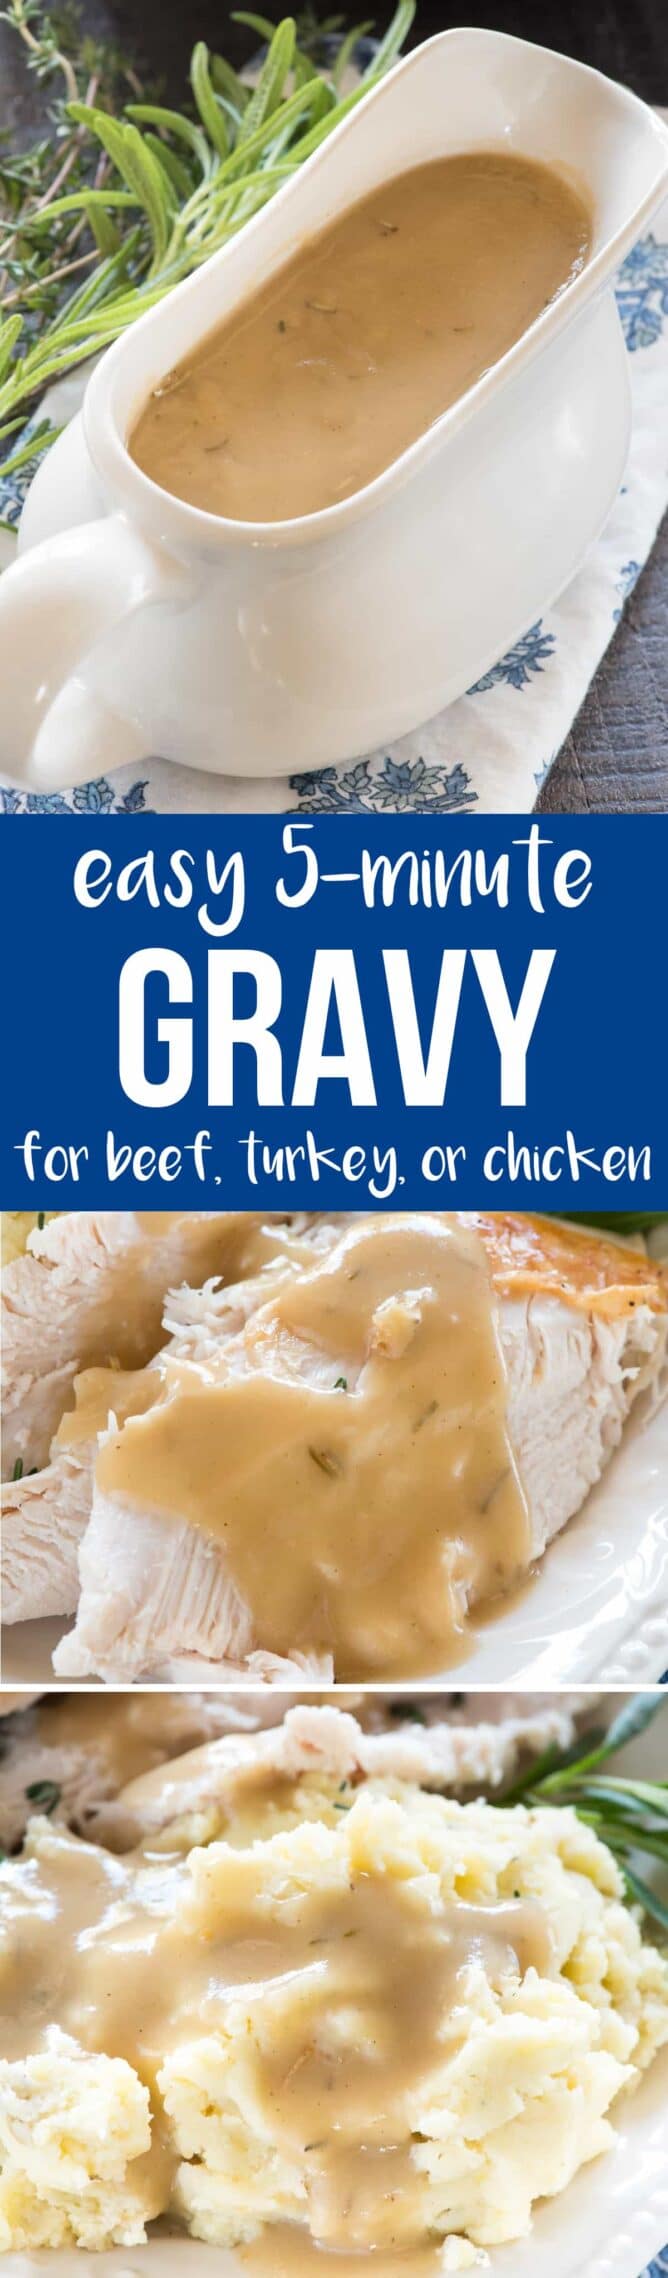 Collage of Easy 5 minute gravy with words